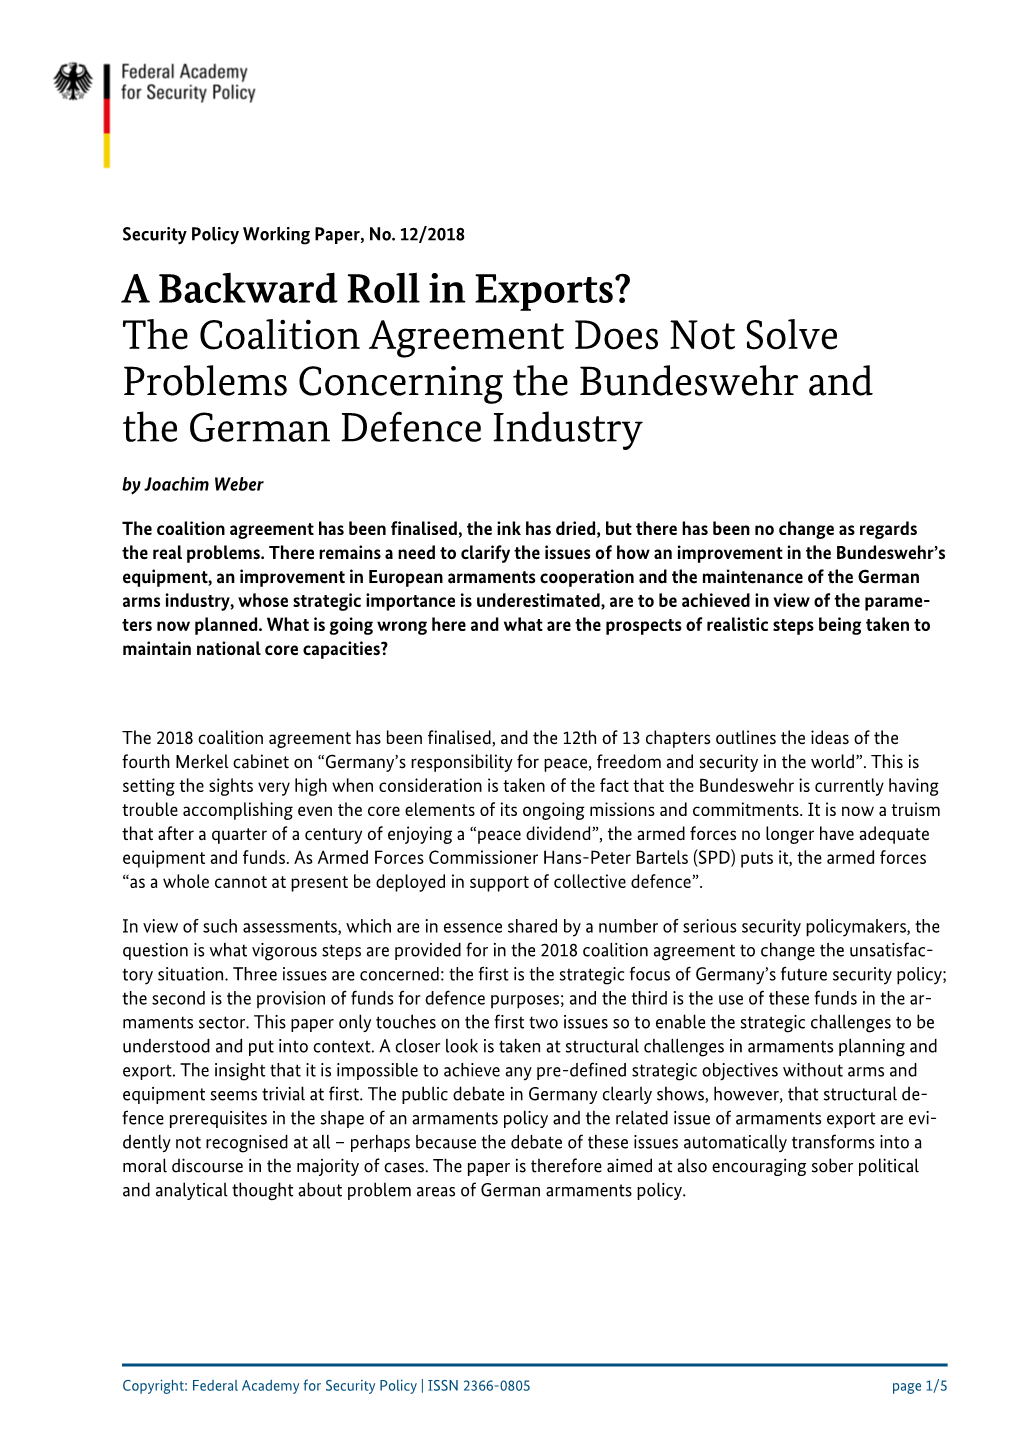 A Backward Roll in Exports? the Coalition Agreement Does Not Solve Problems Concerning the Bundeswehr and the German Defence Industry by Joachim Weber